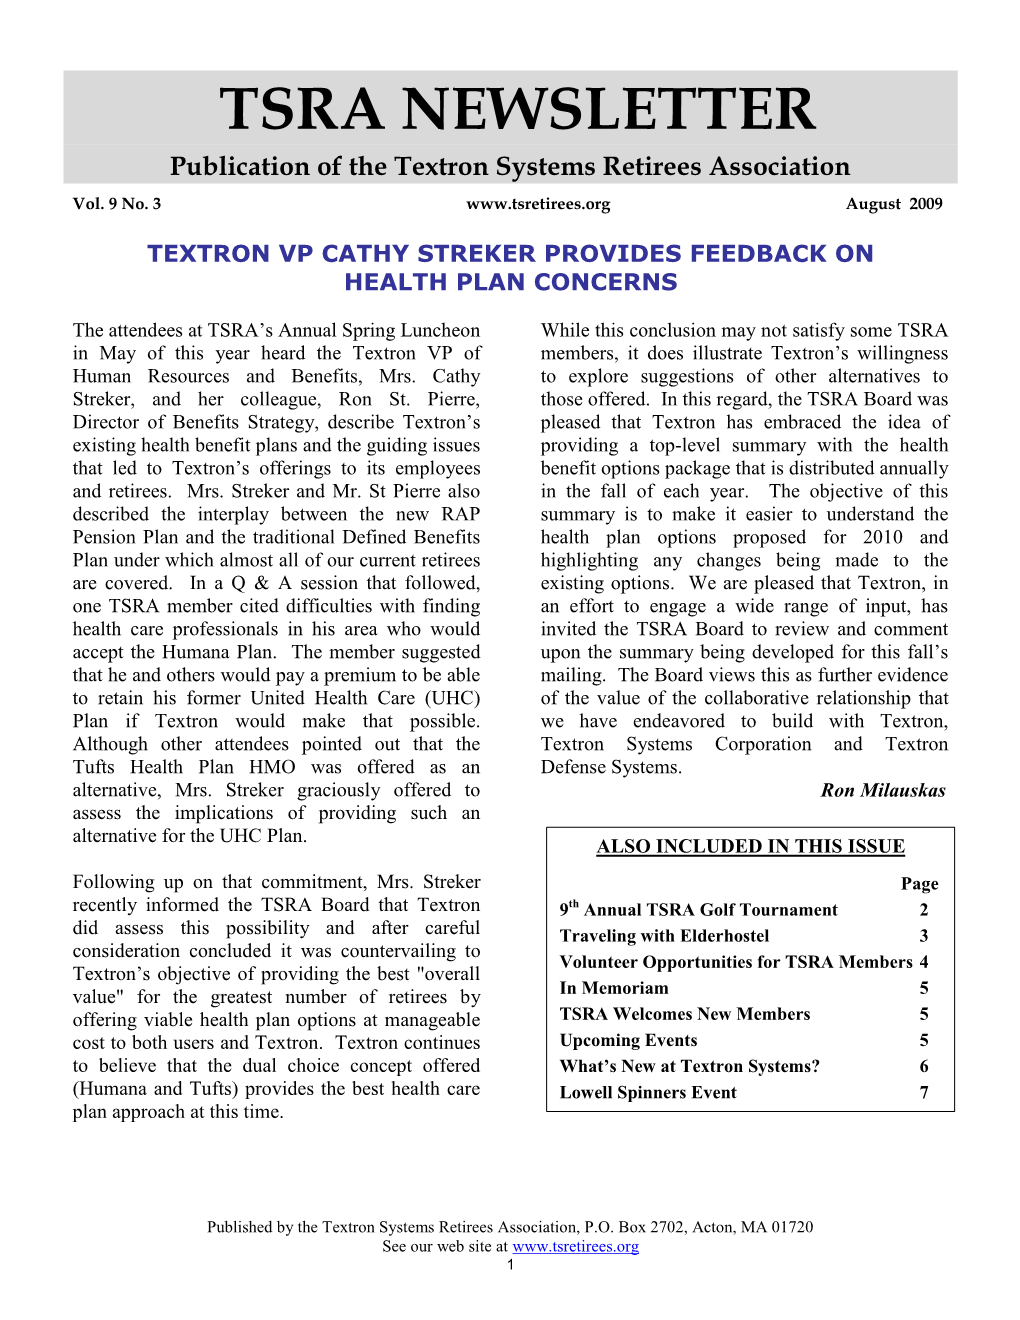 TSRA NEWSLETTER Publication of the Textron Systems Retirees Association Vol